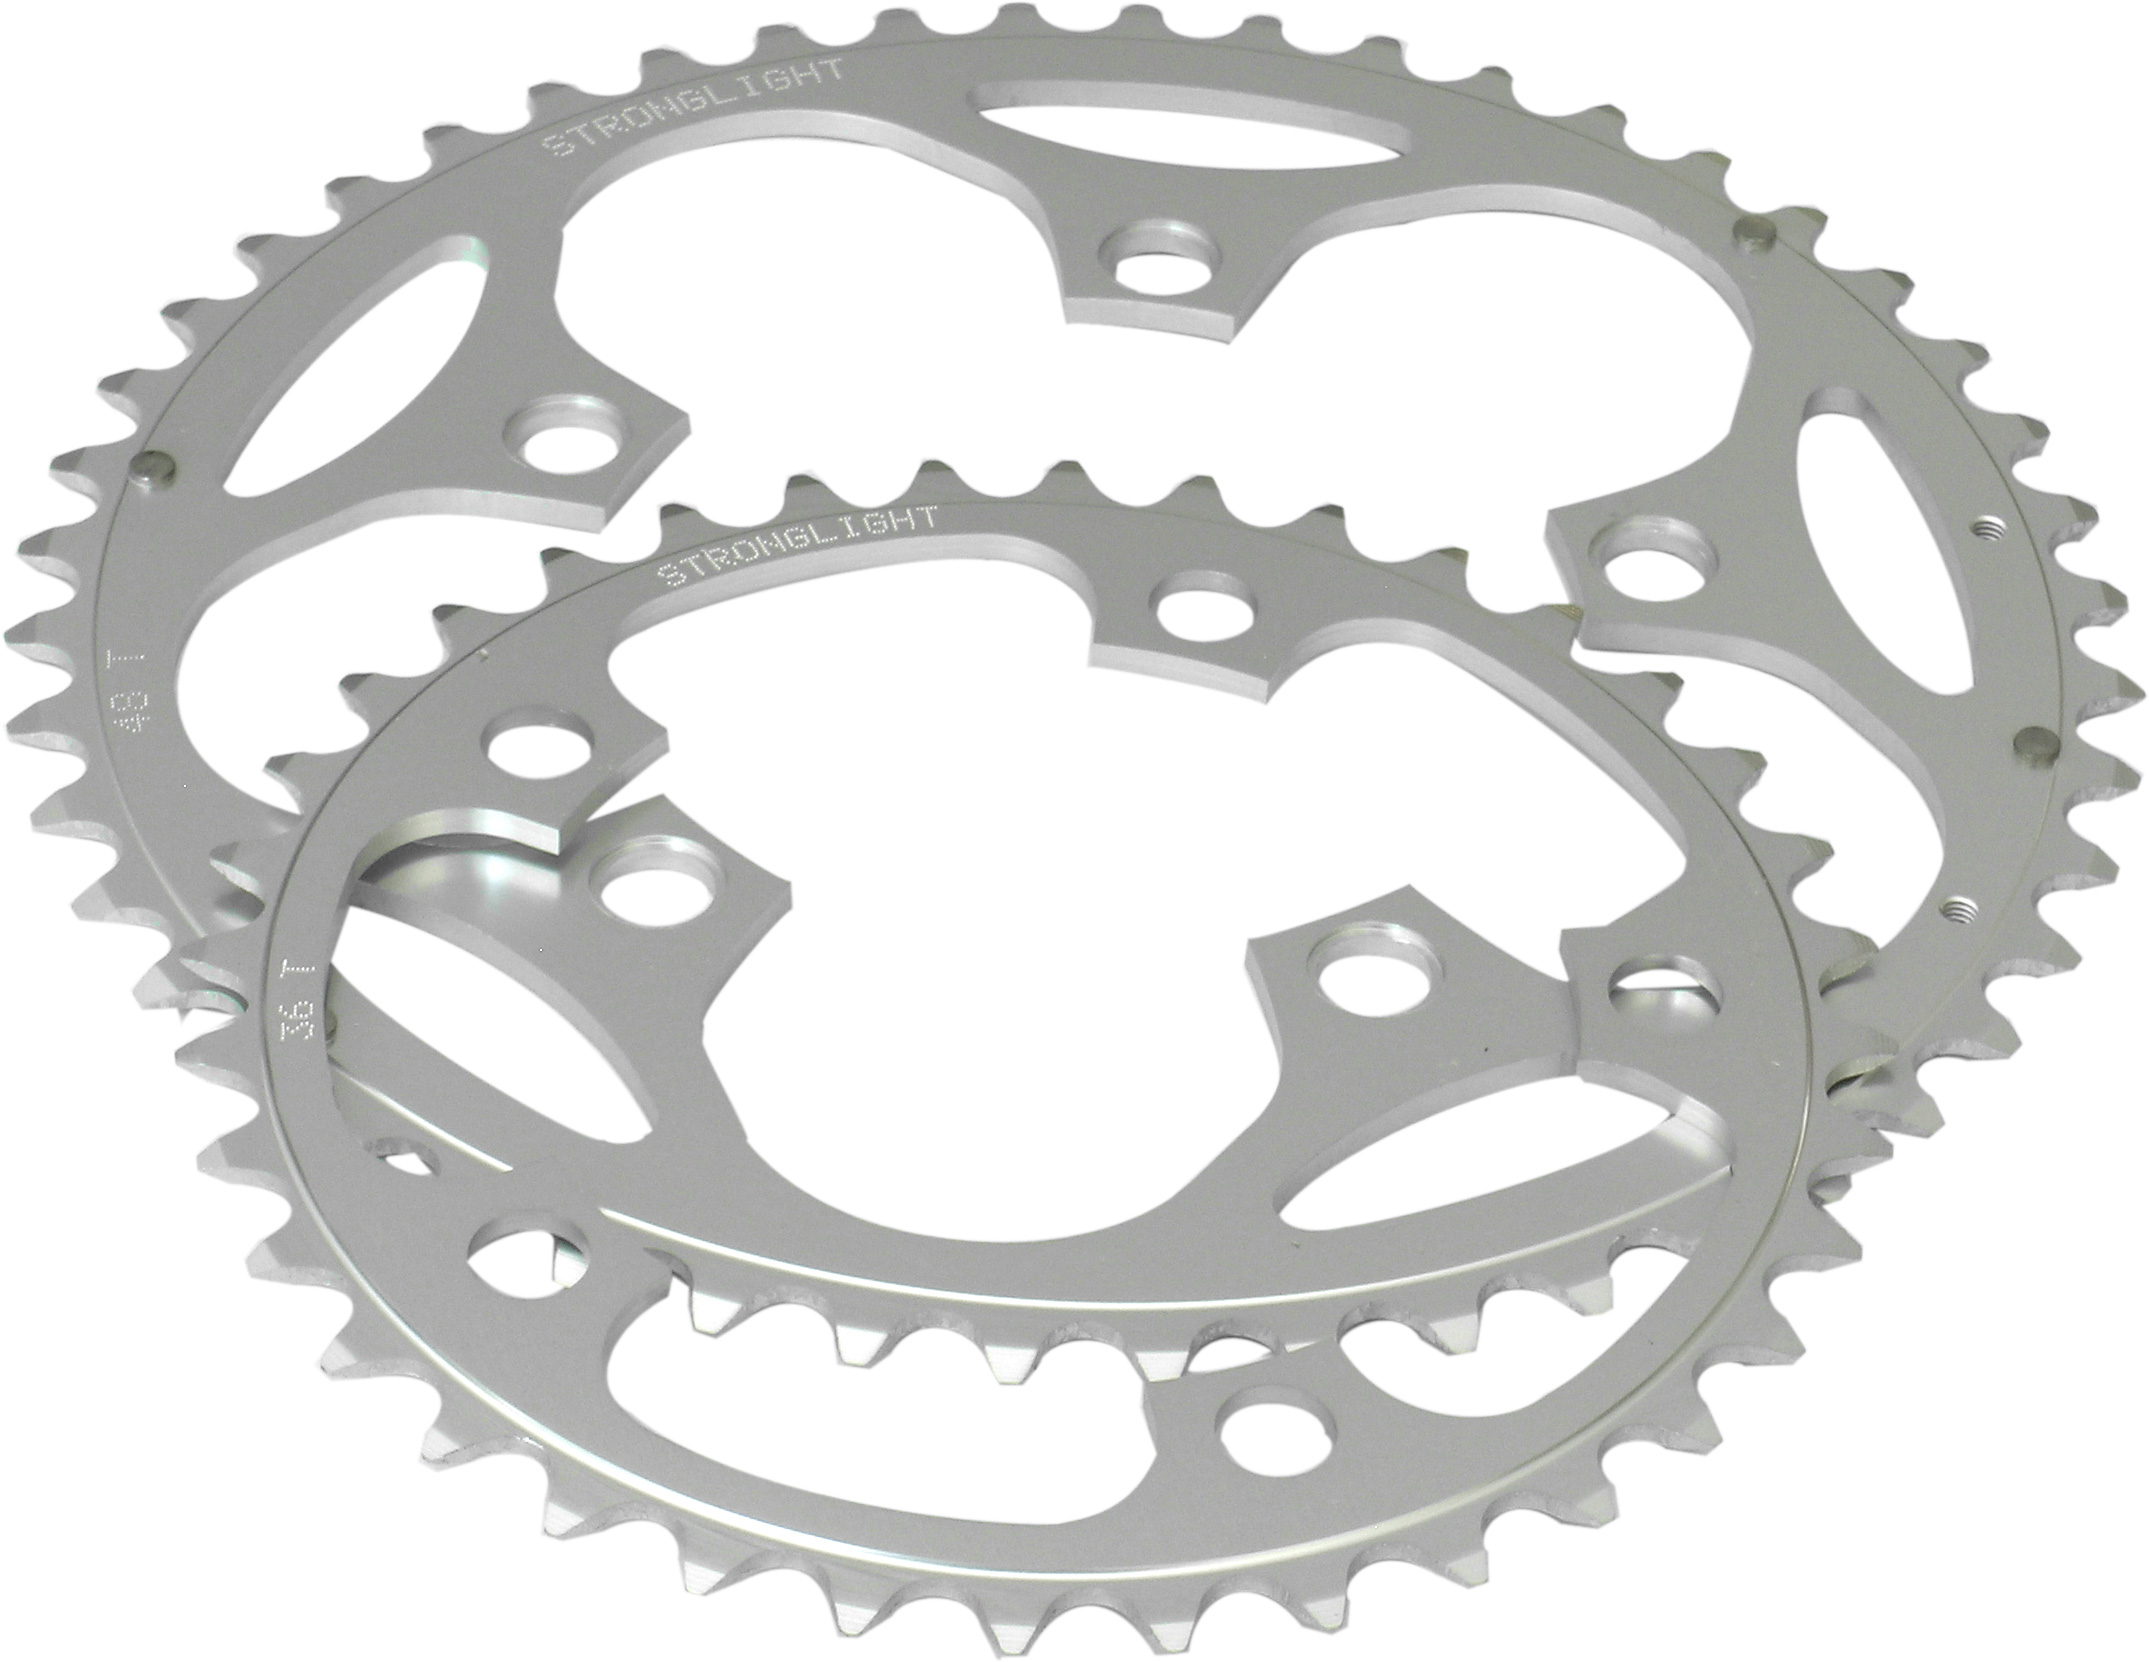 RD11046S Stronglight 46T Silver 5-Arm Alloy Chainring